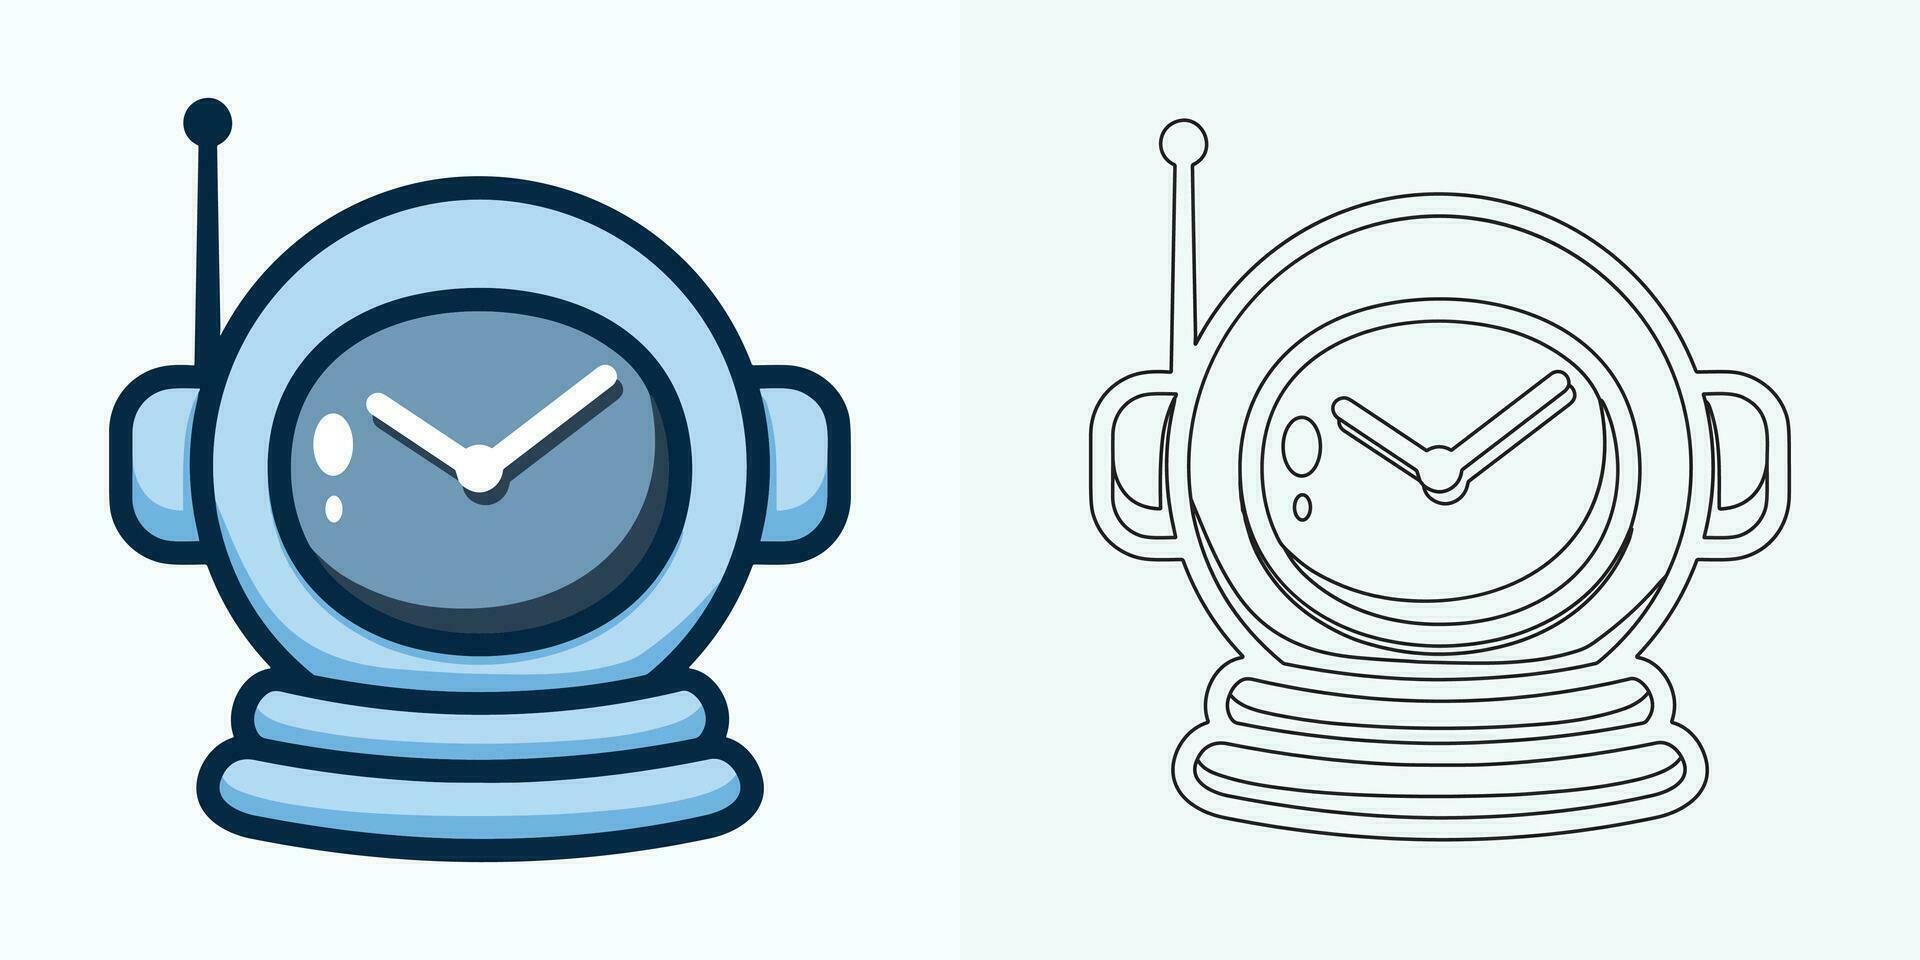 new style Analog clock flat vector icon. Symbol of time management, chronometer with hour, minute, and second arrow. Simple illustration isolated on a white background.